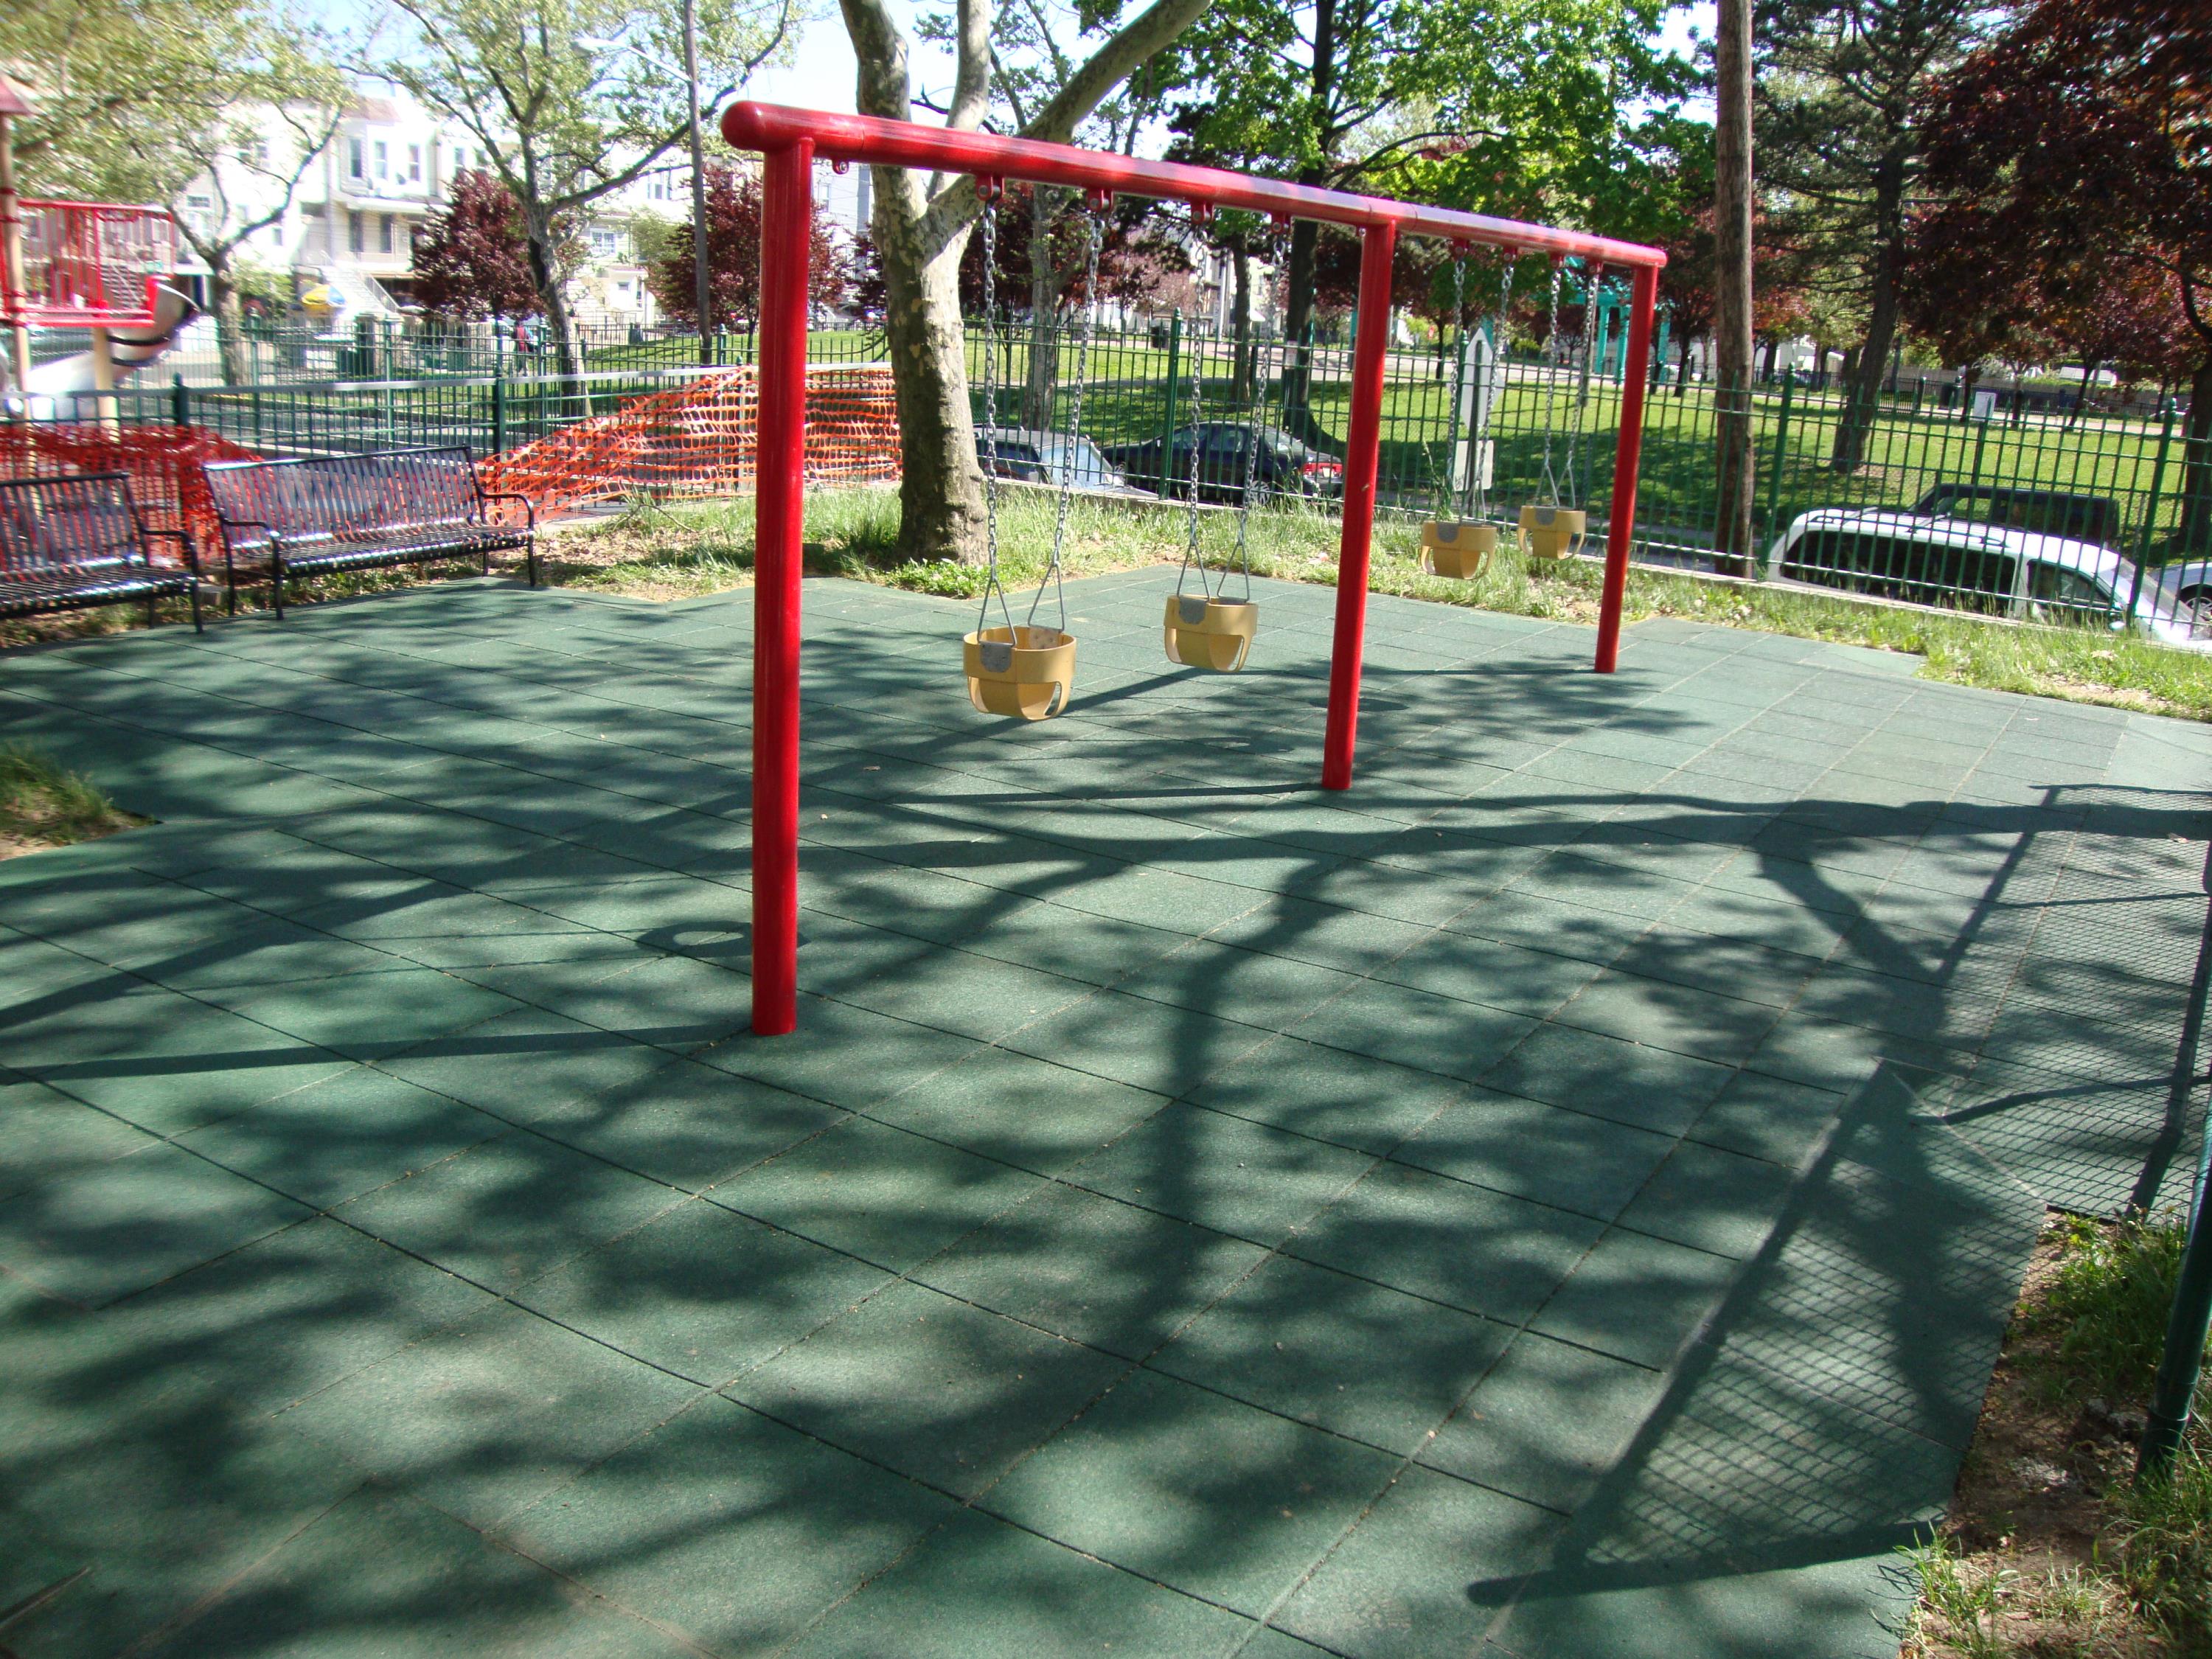 Large Public Park with Multiple Playgrounds Using Designs b